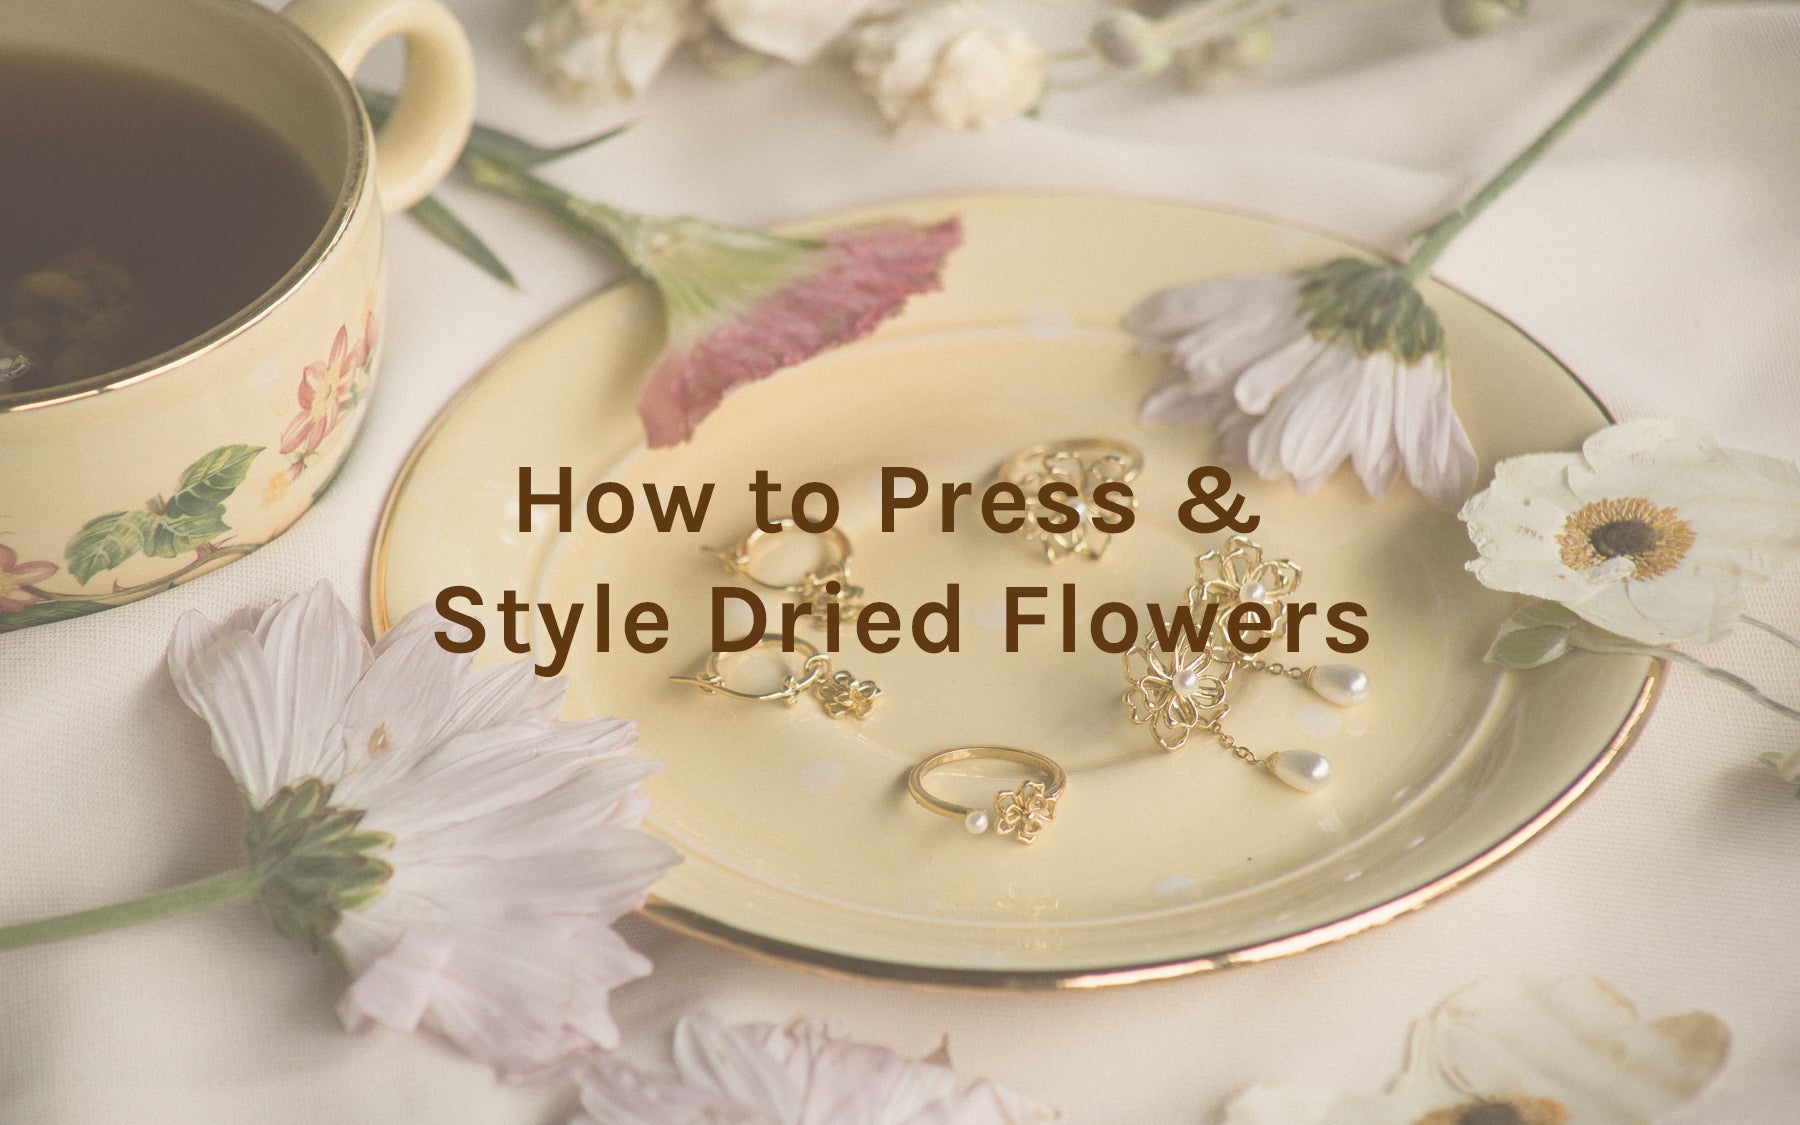 How to Press & Style Dried Flowers